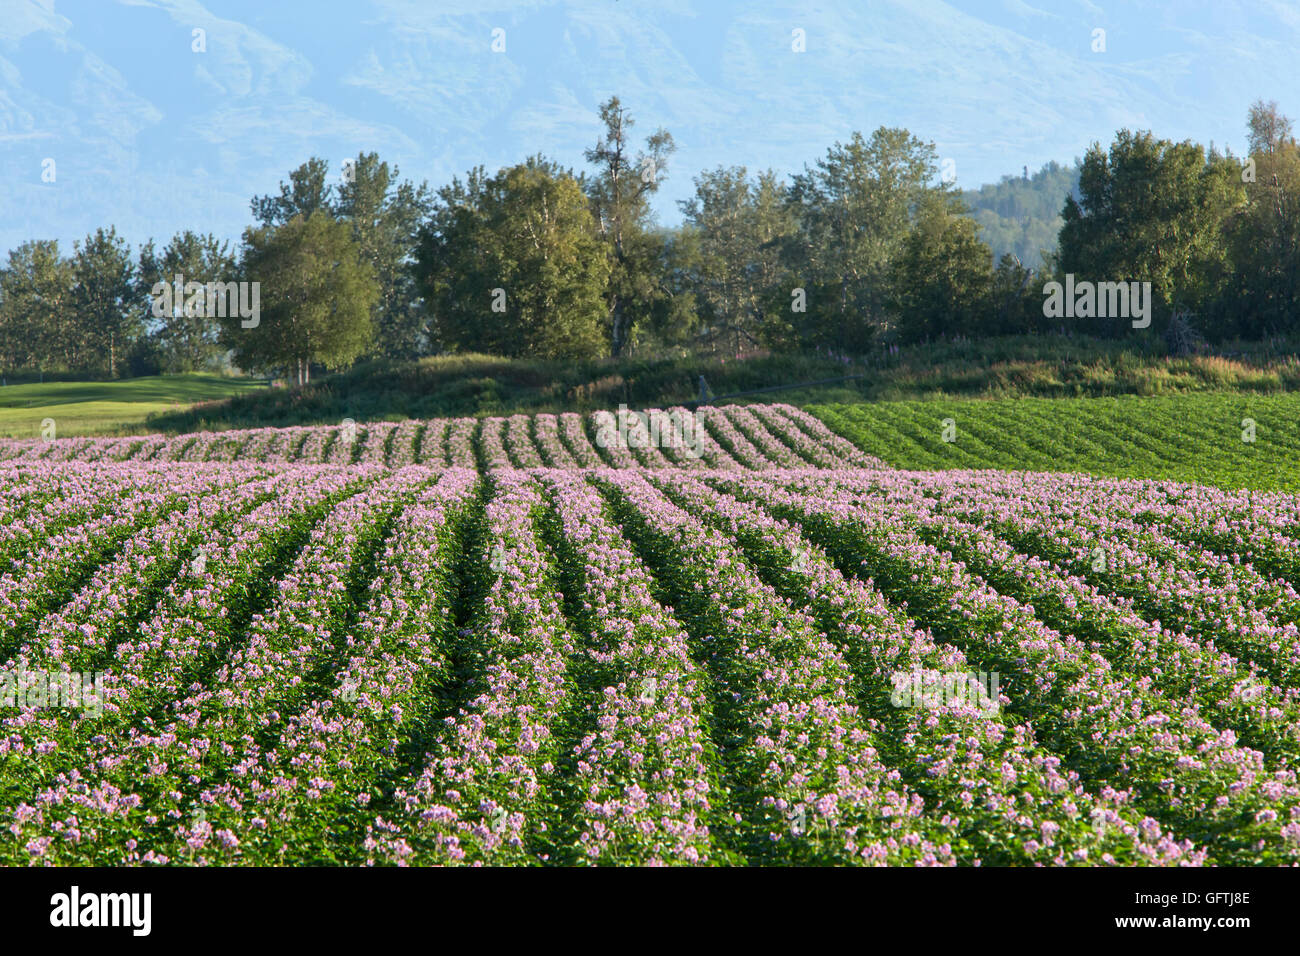 Red potato 'Chieftain' flowering field, converging rows. Stock Photo